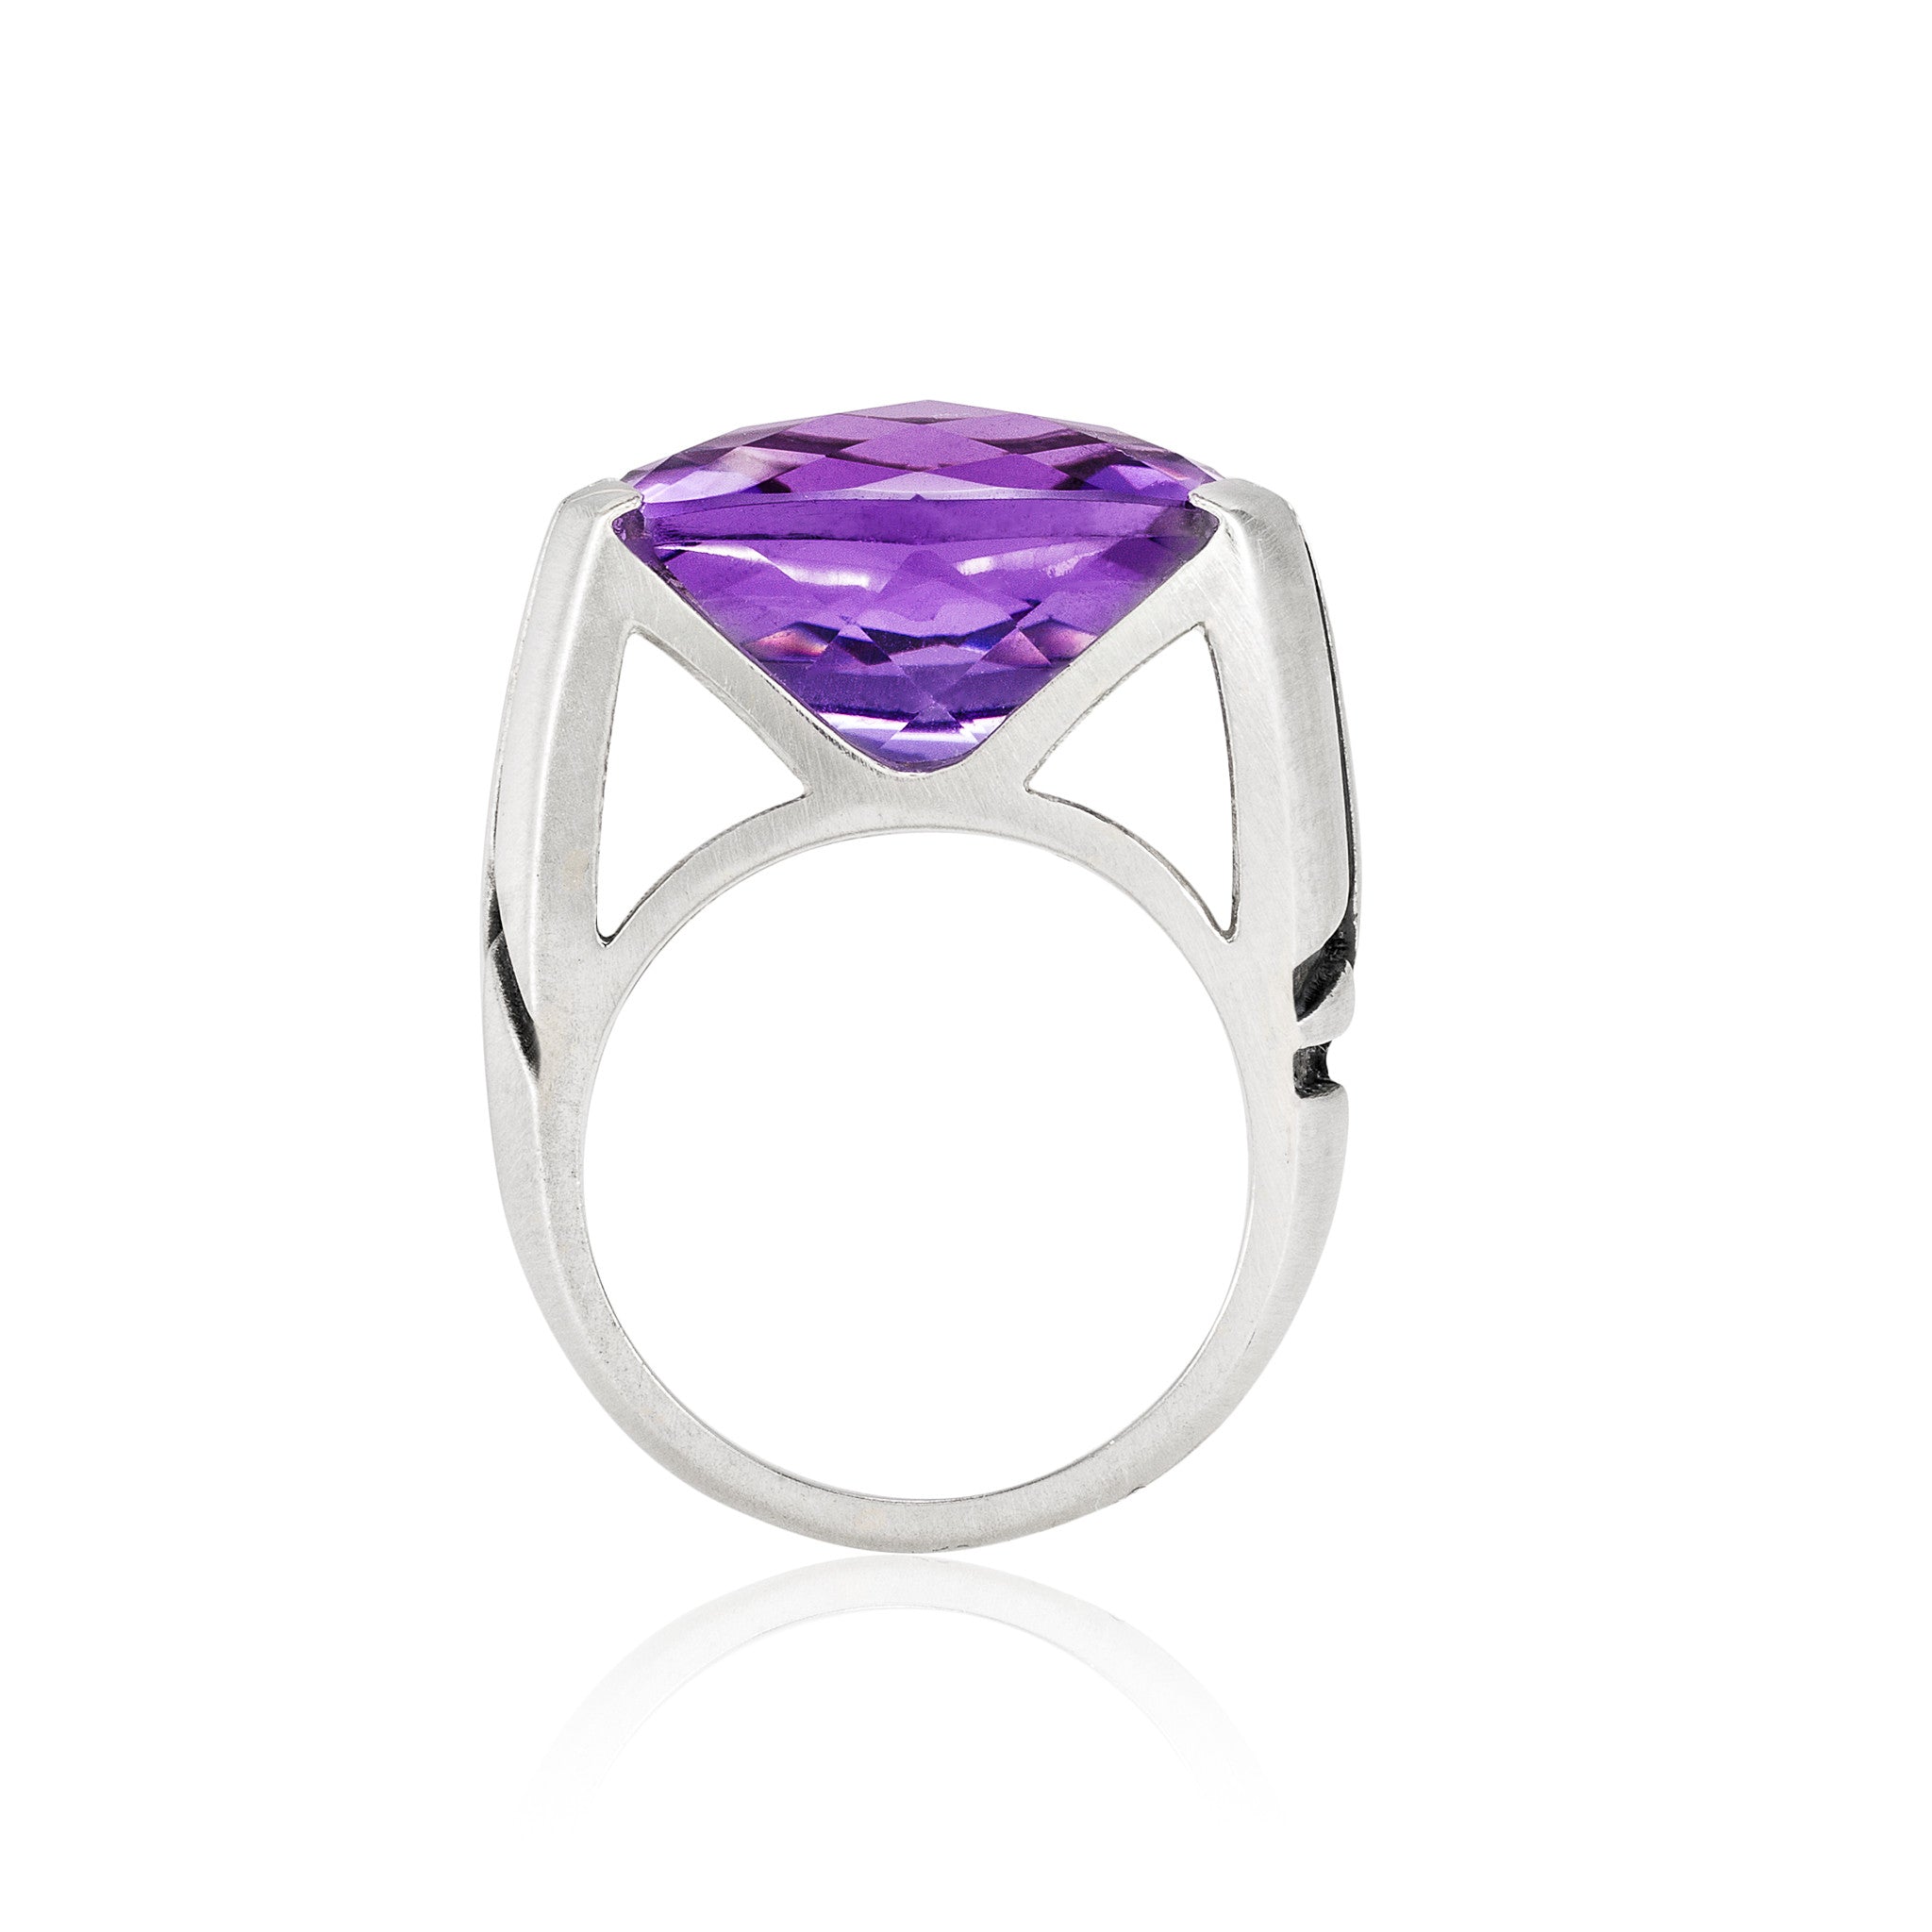 Square Cocktail Ring: Amethyst